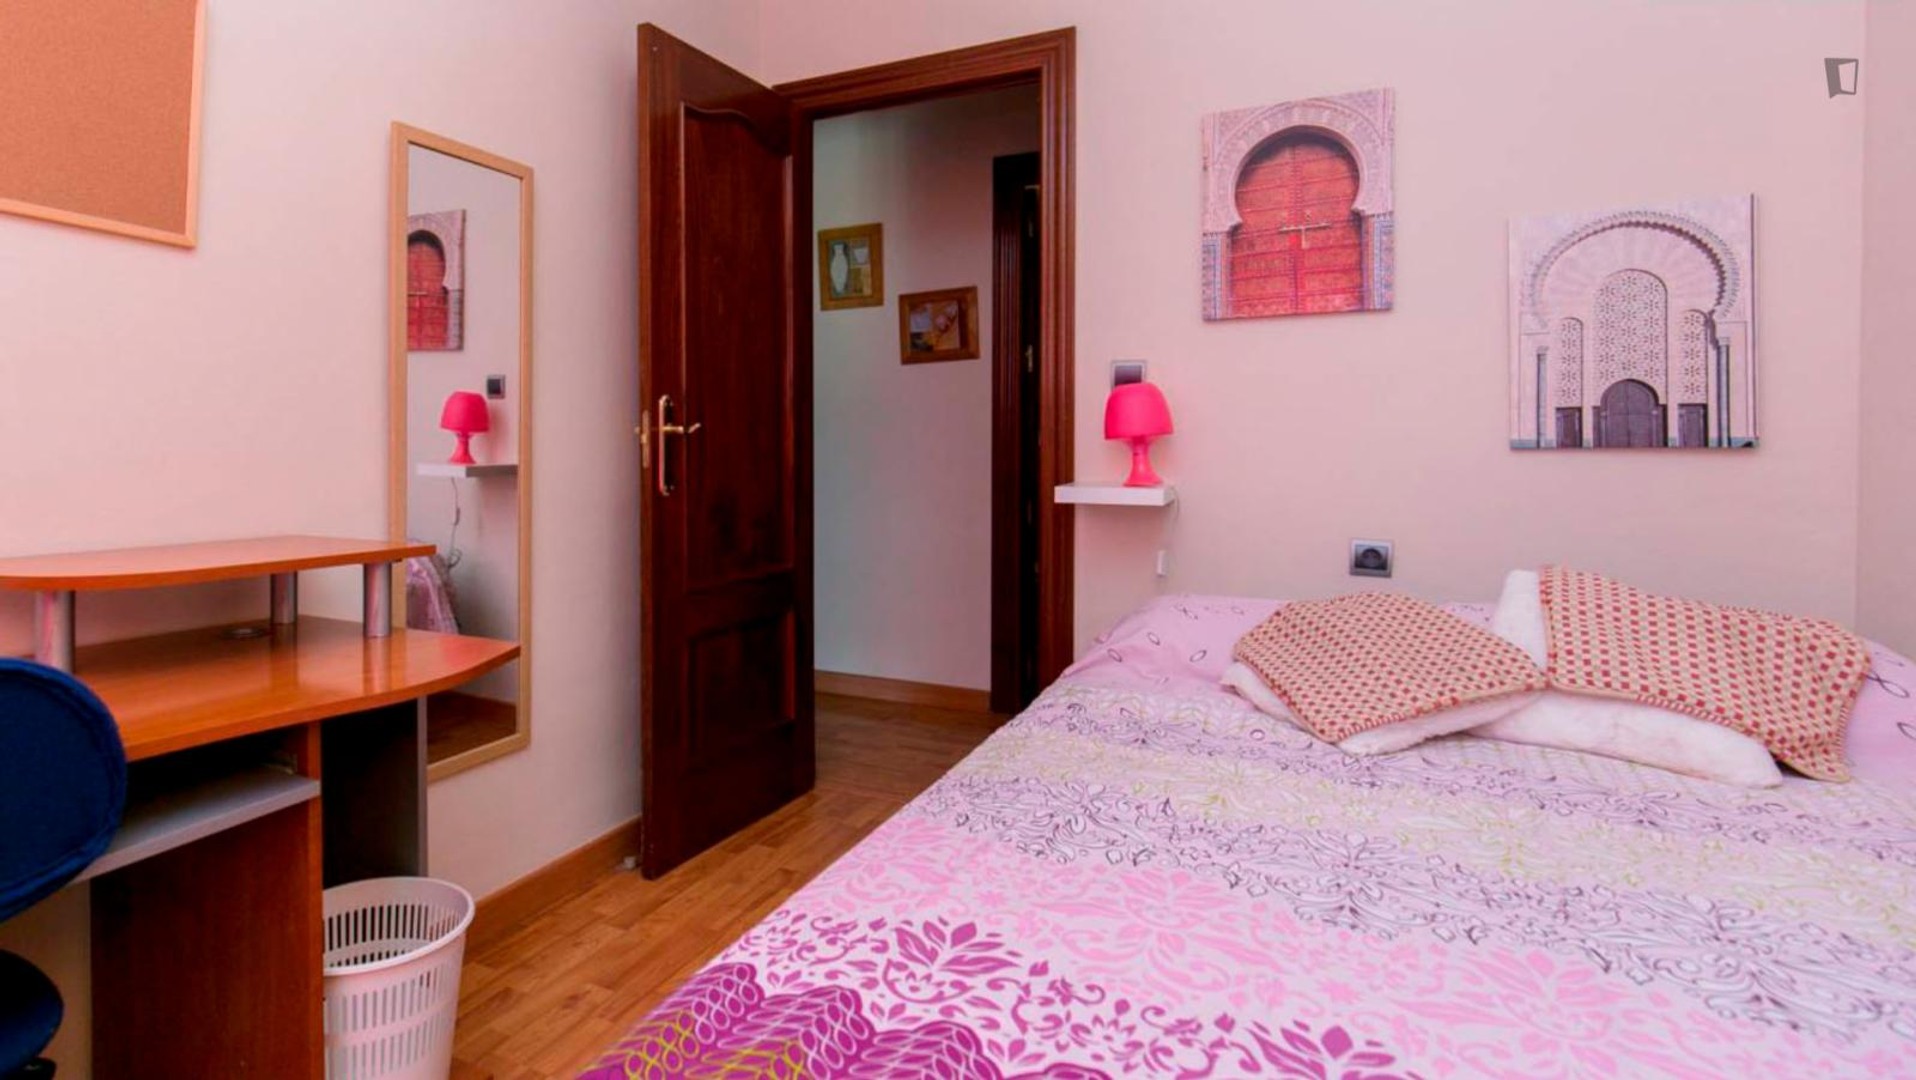 Room for rent with double bed granada